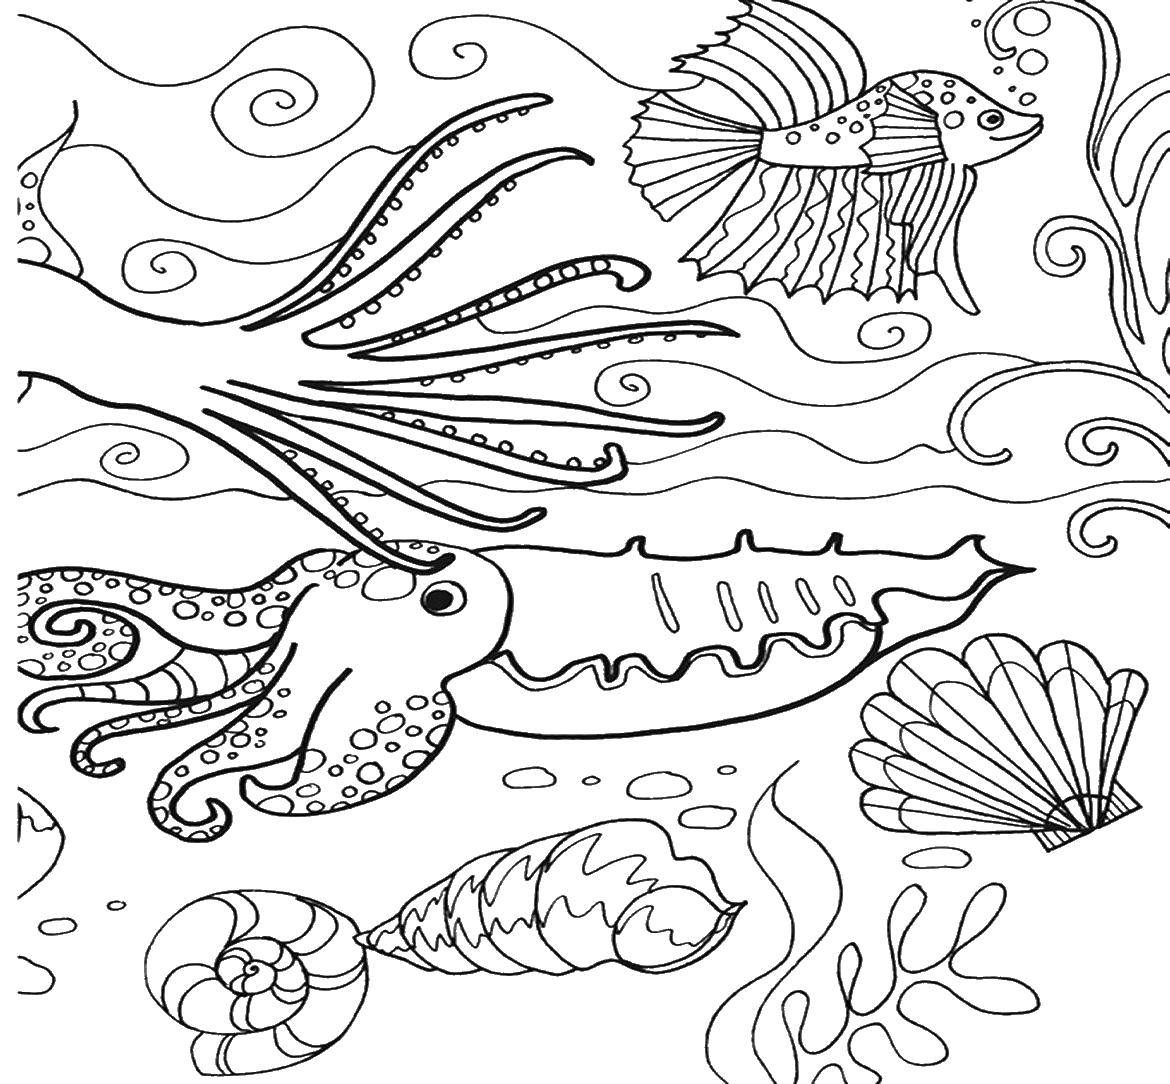 Coloring Marine inhabitants. Category marine. Tags:  fish, sea, jellyfish, whale, octopus.